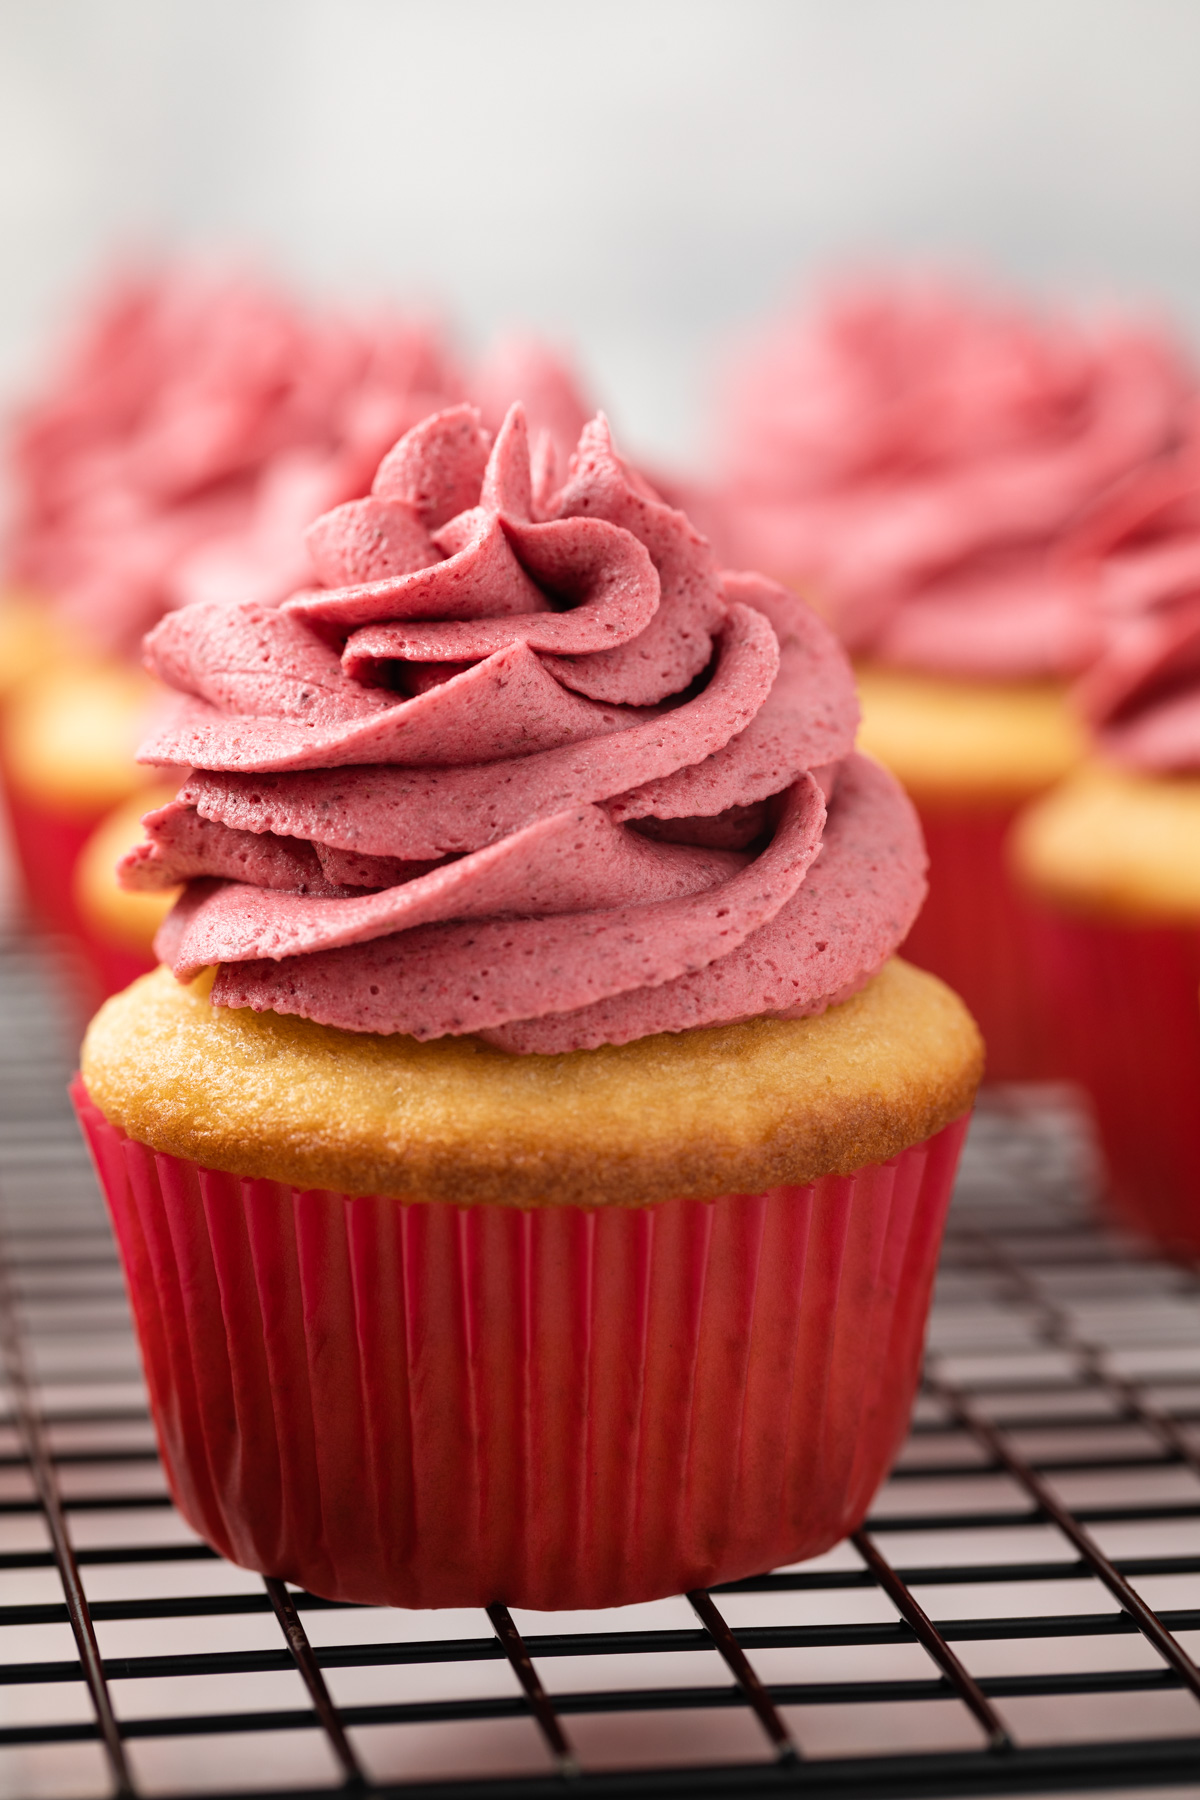 Raspberry frosting swirled on top of a yellow cupcake.